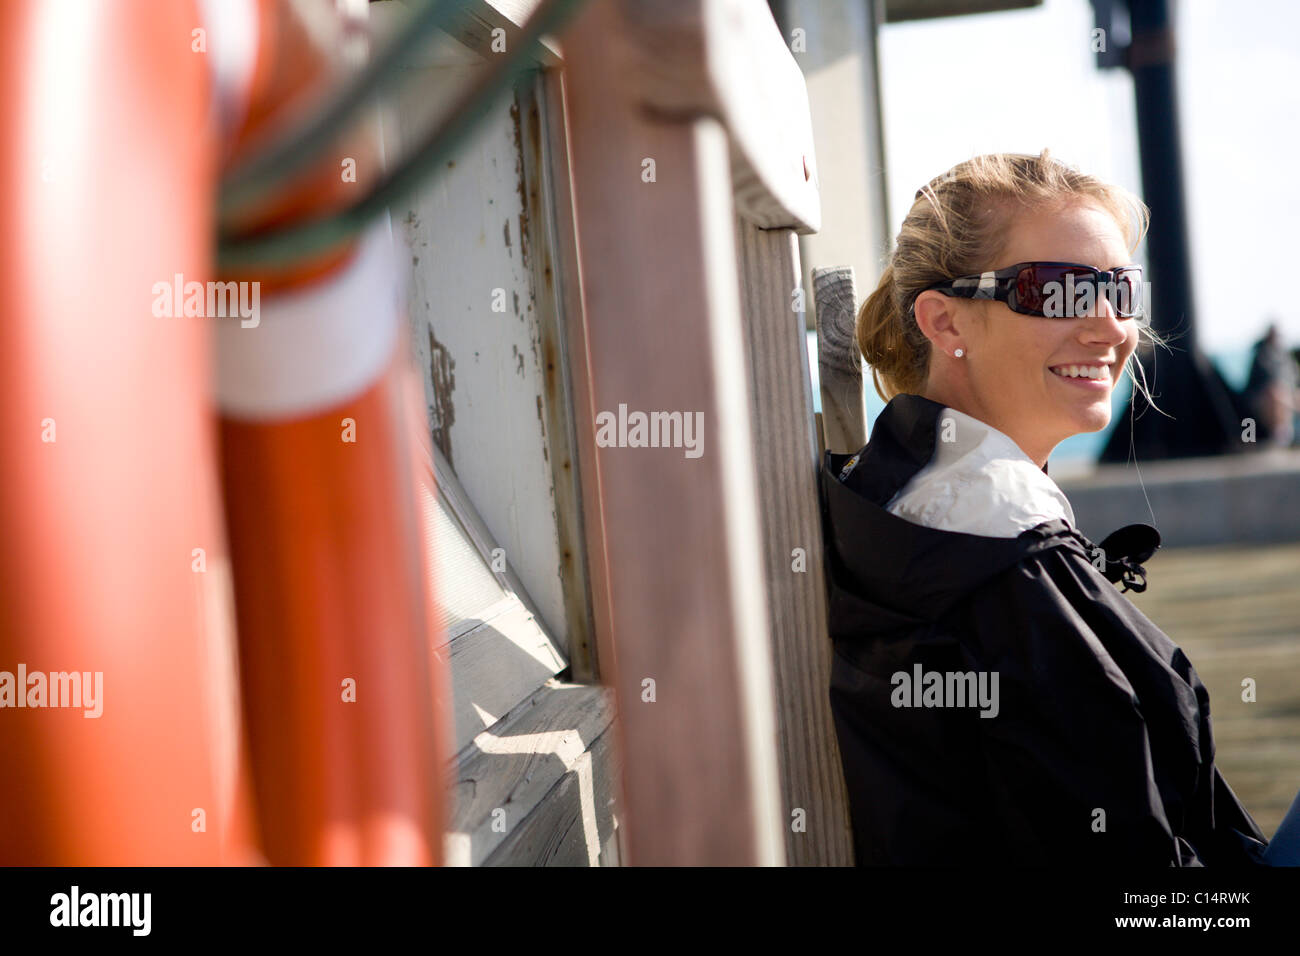 A mid adult woman sits against a dock with an orange life preserver in the foreground. Stock Photo